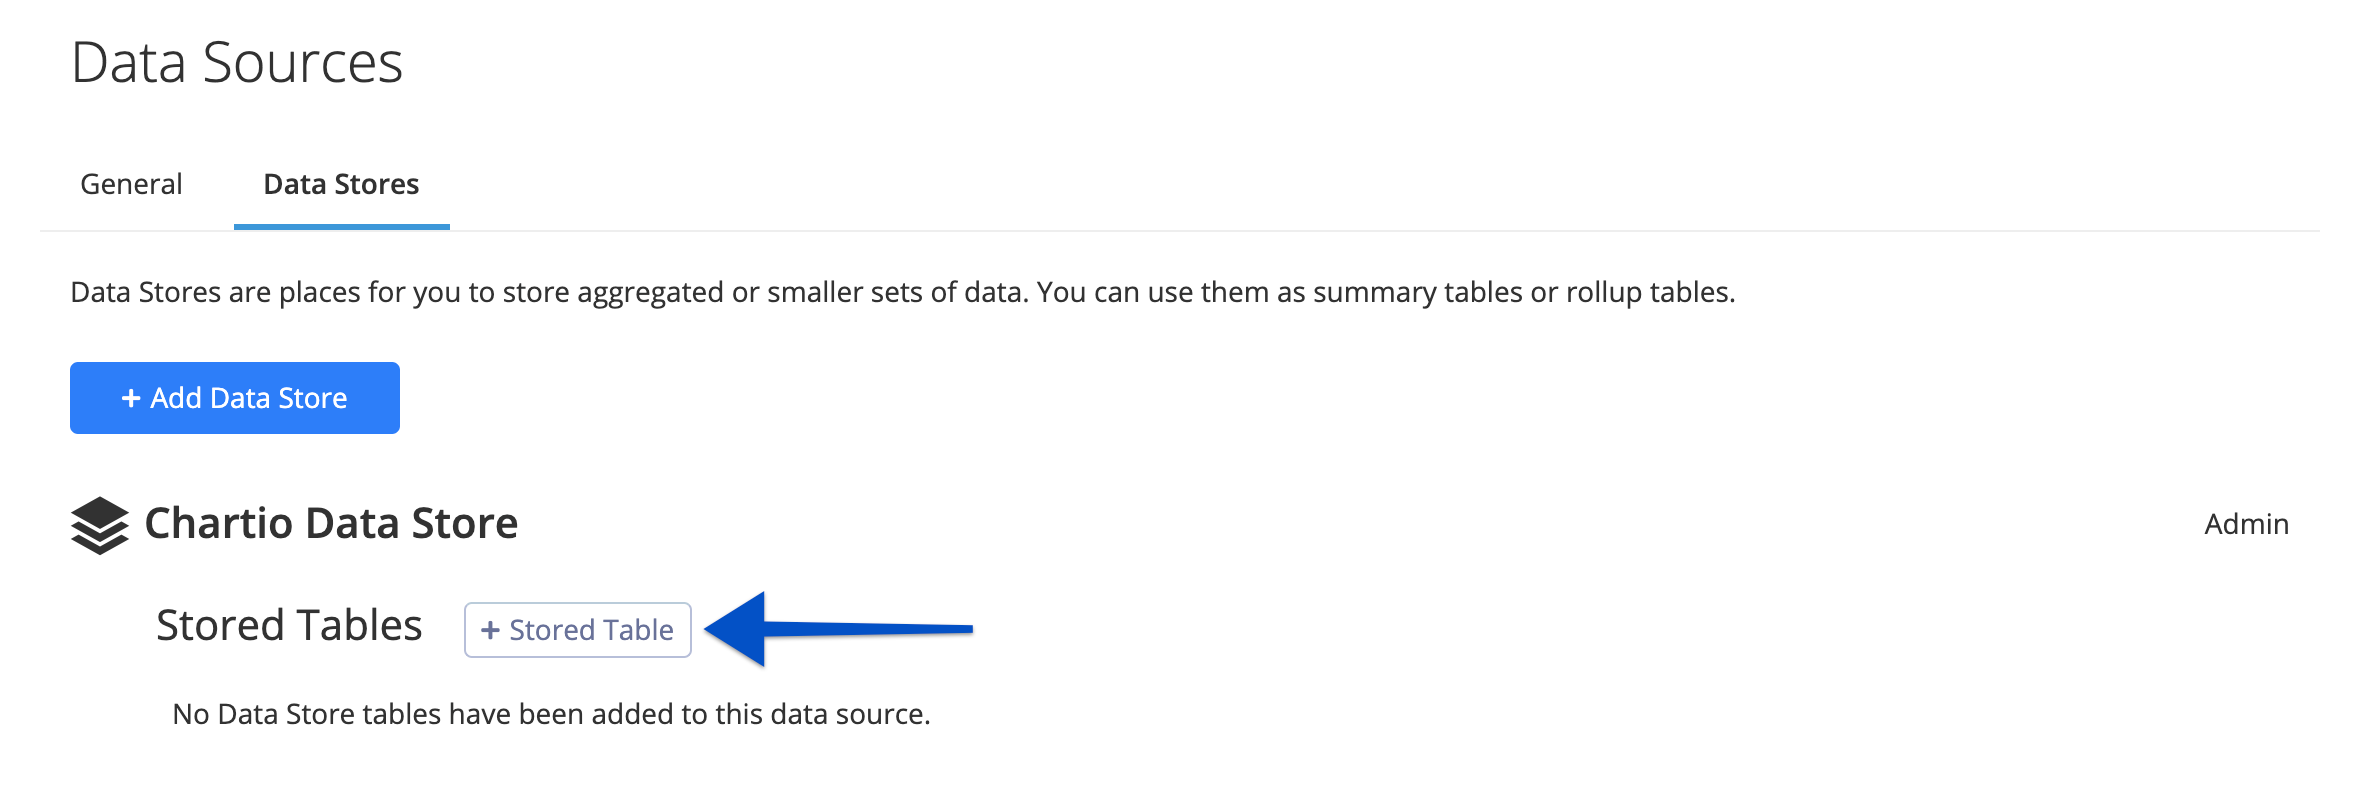 Add Data Store Table